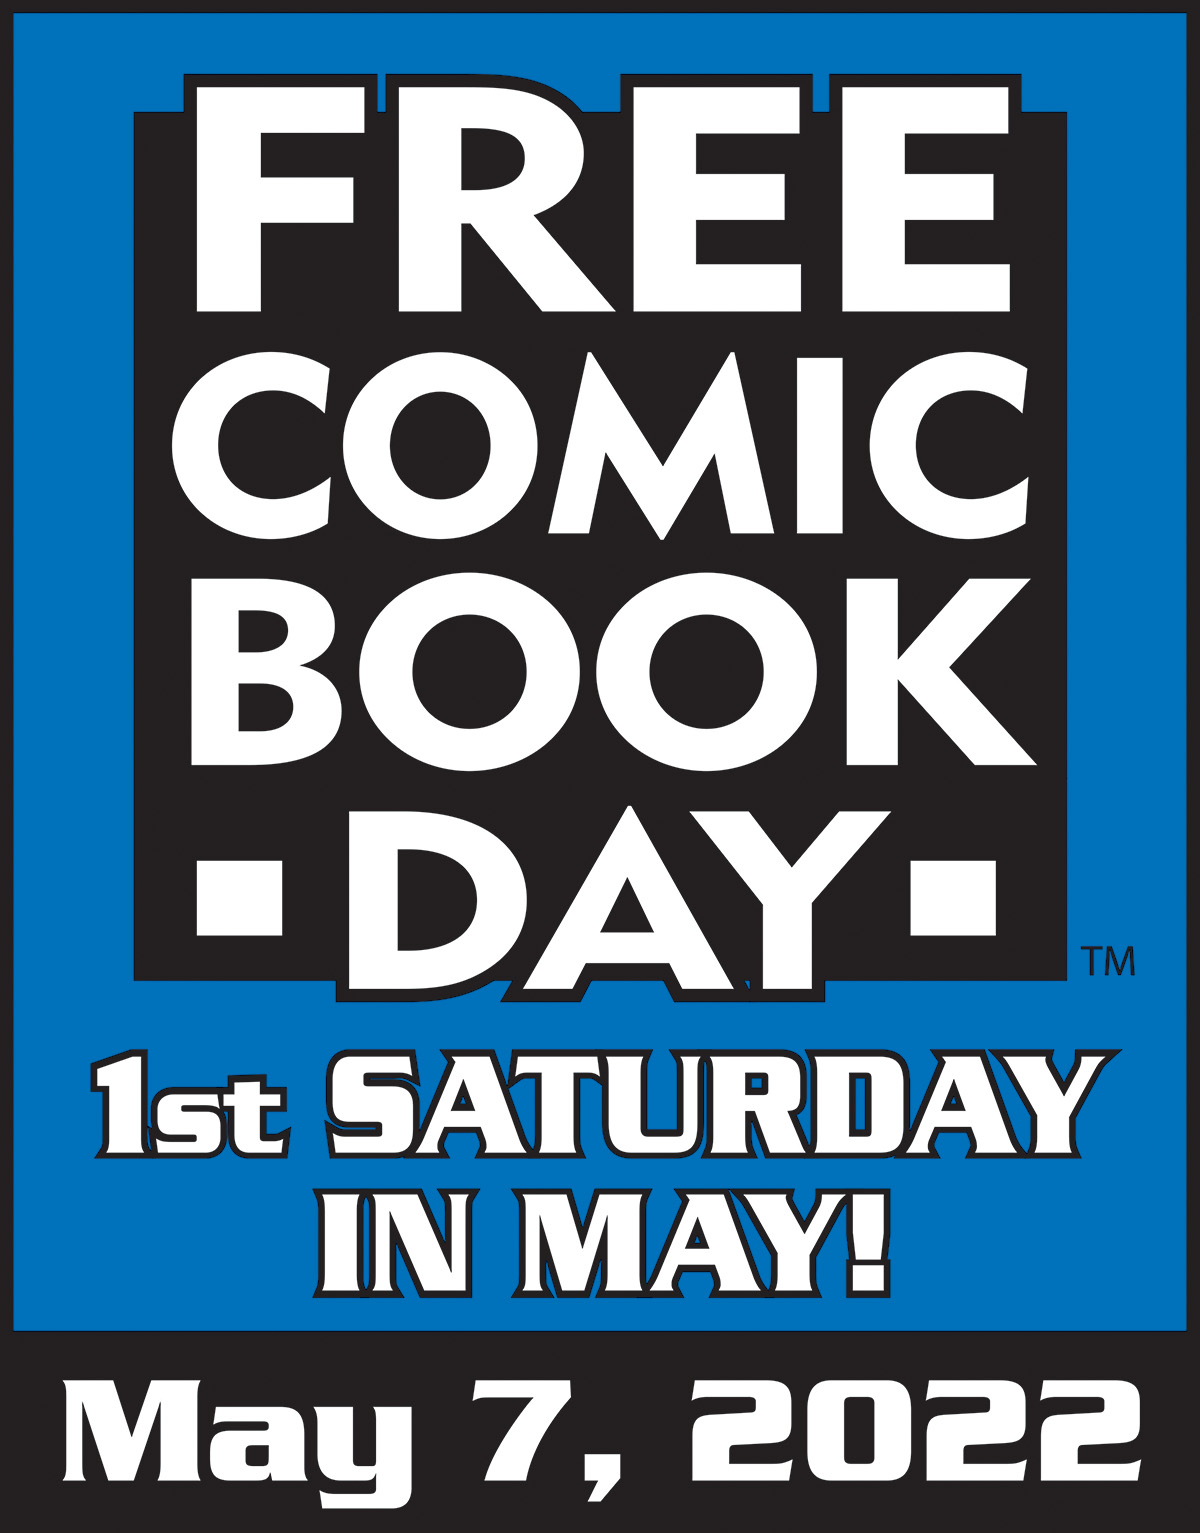 The logo for Free Comic Book Day